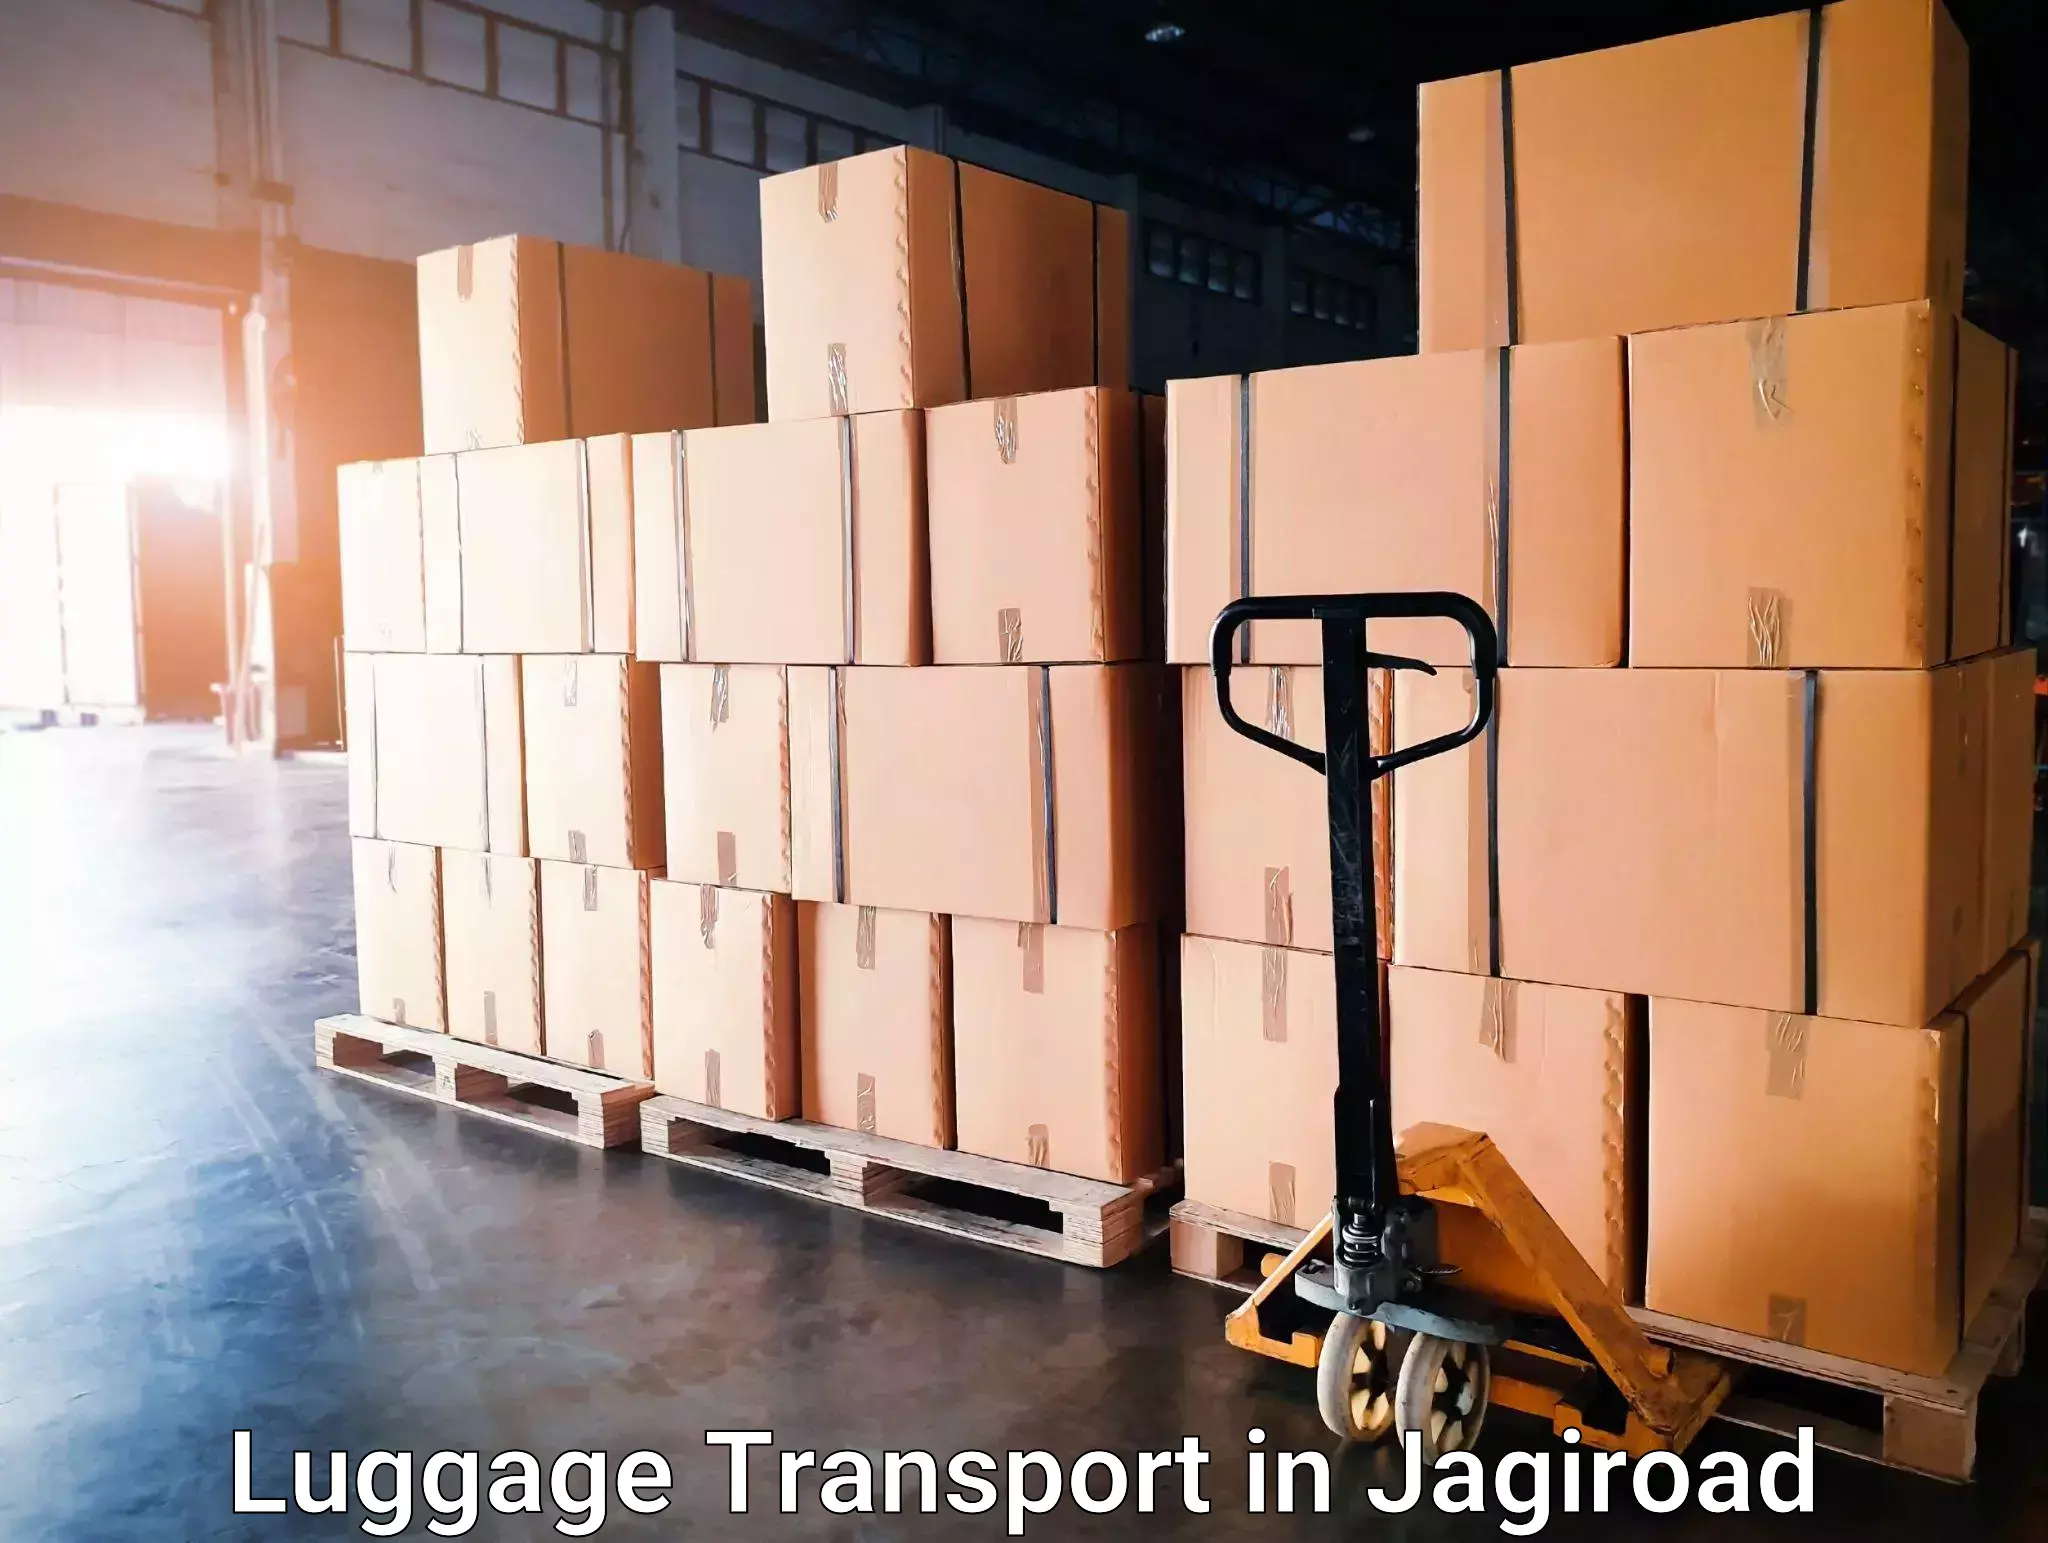 Luggage transport operations in Jagiroad